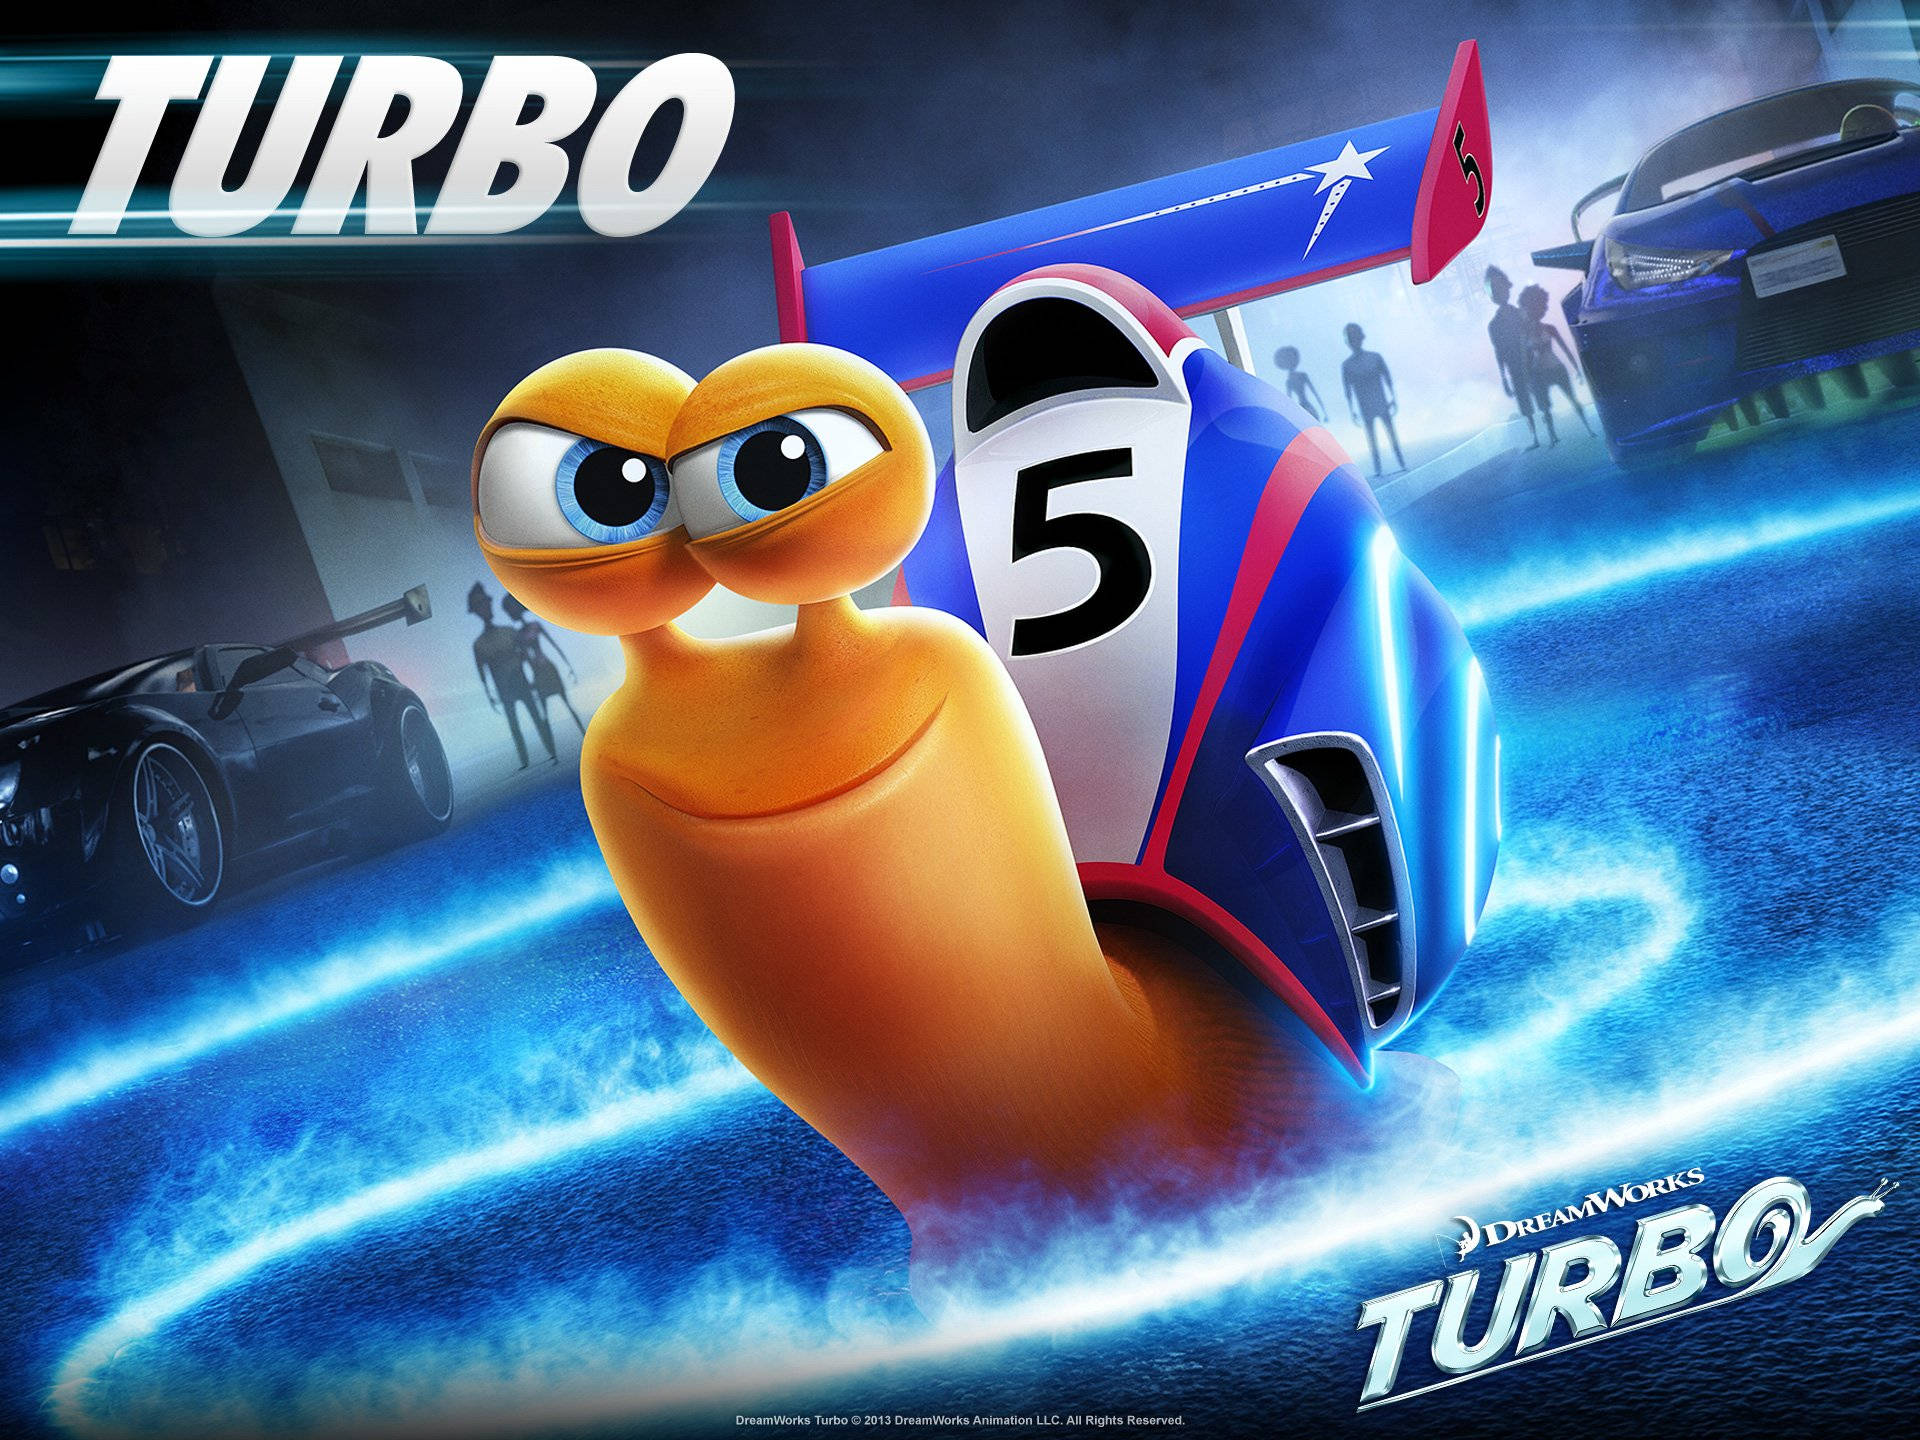 Cool Turbo Animed Film Poster Background